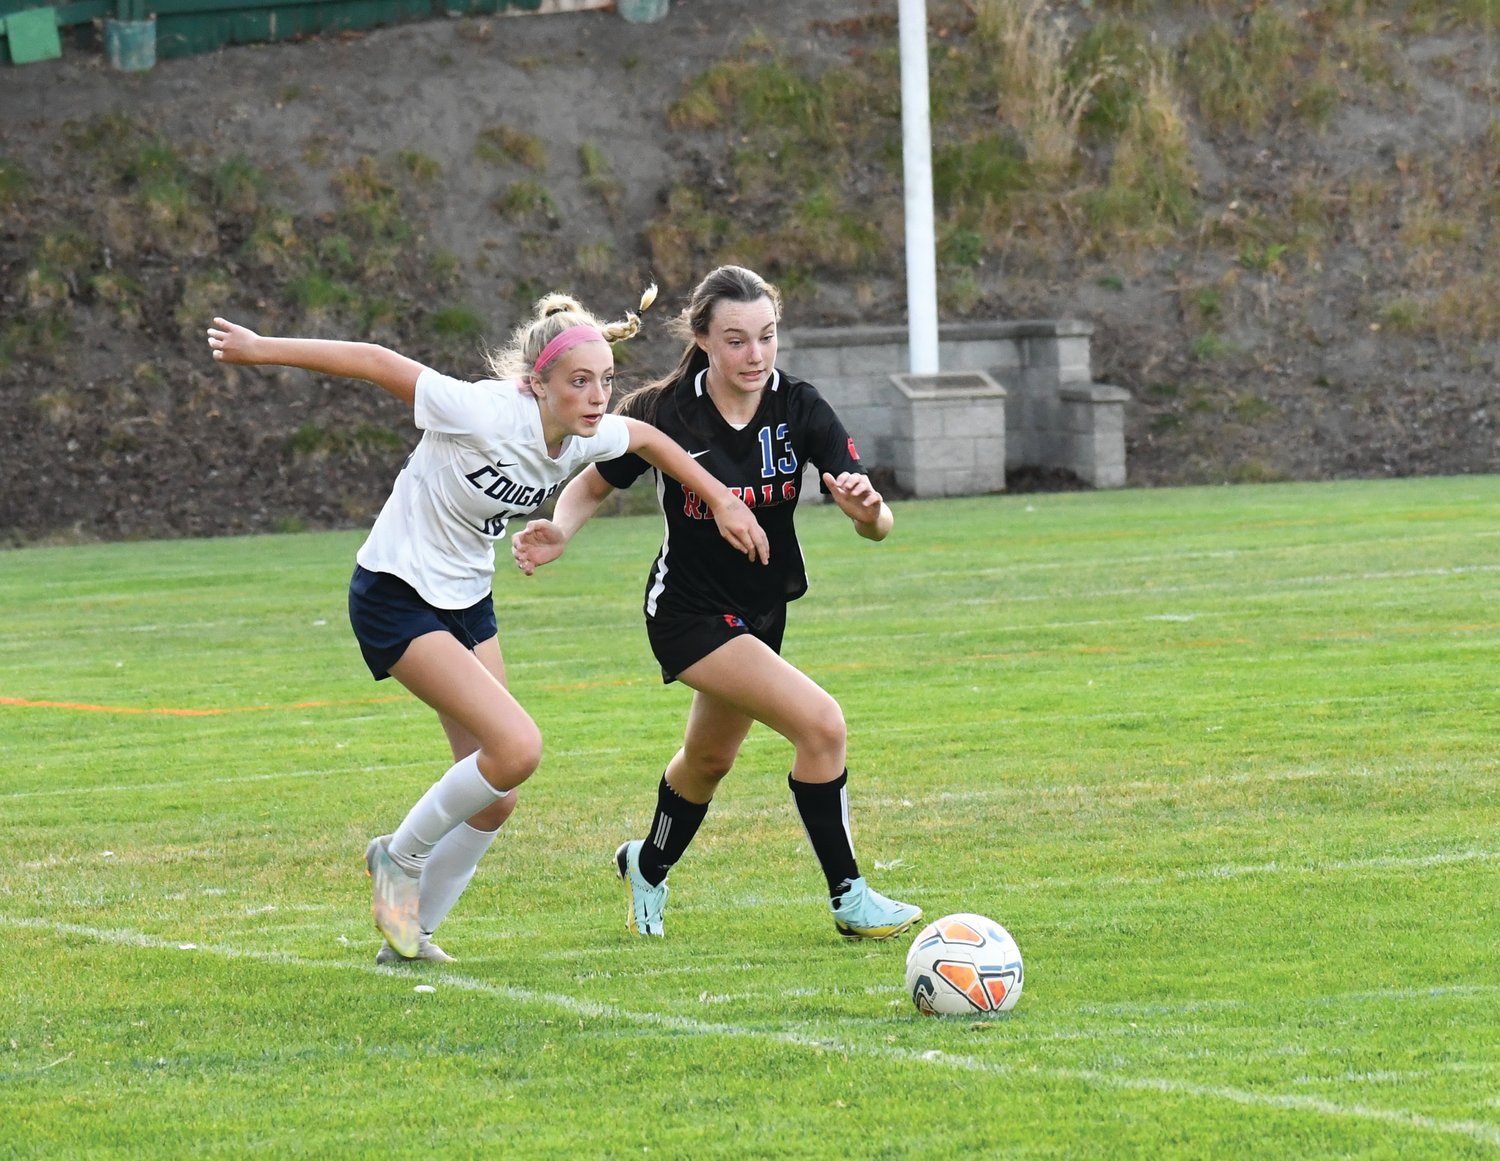 EJ defender Kay Botkin regains possession of the ball on the sideline.